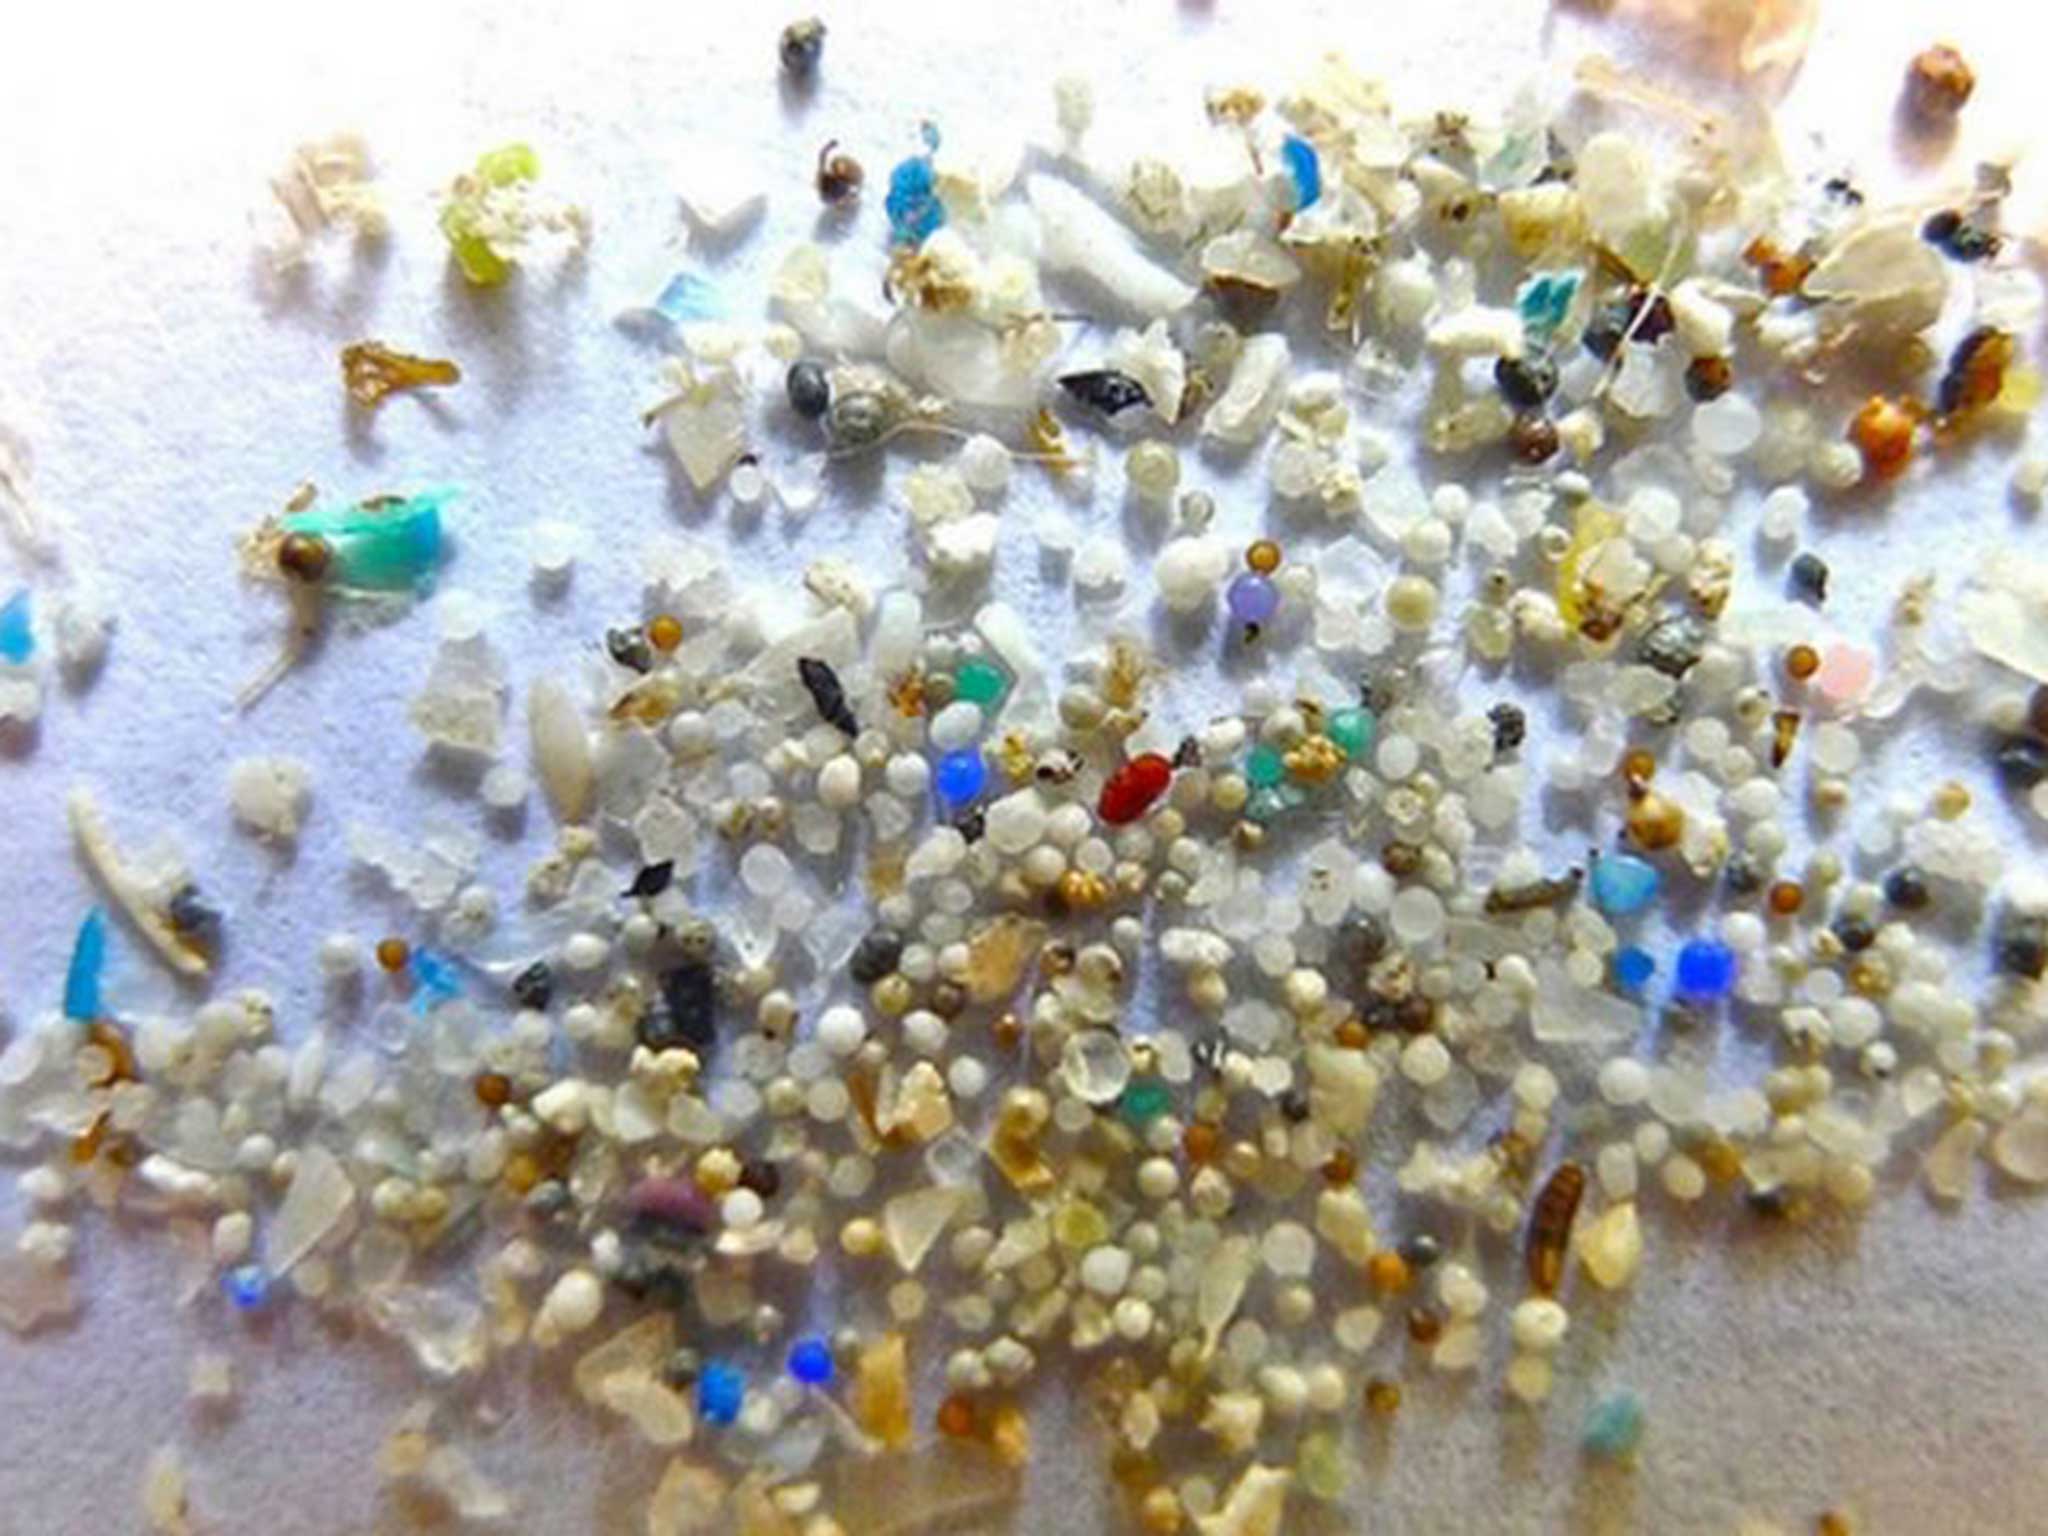 Plastic beads are often invisible to the naked eye and can enter the food chain via fish